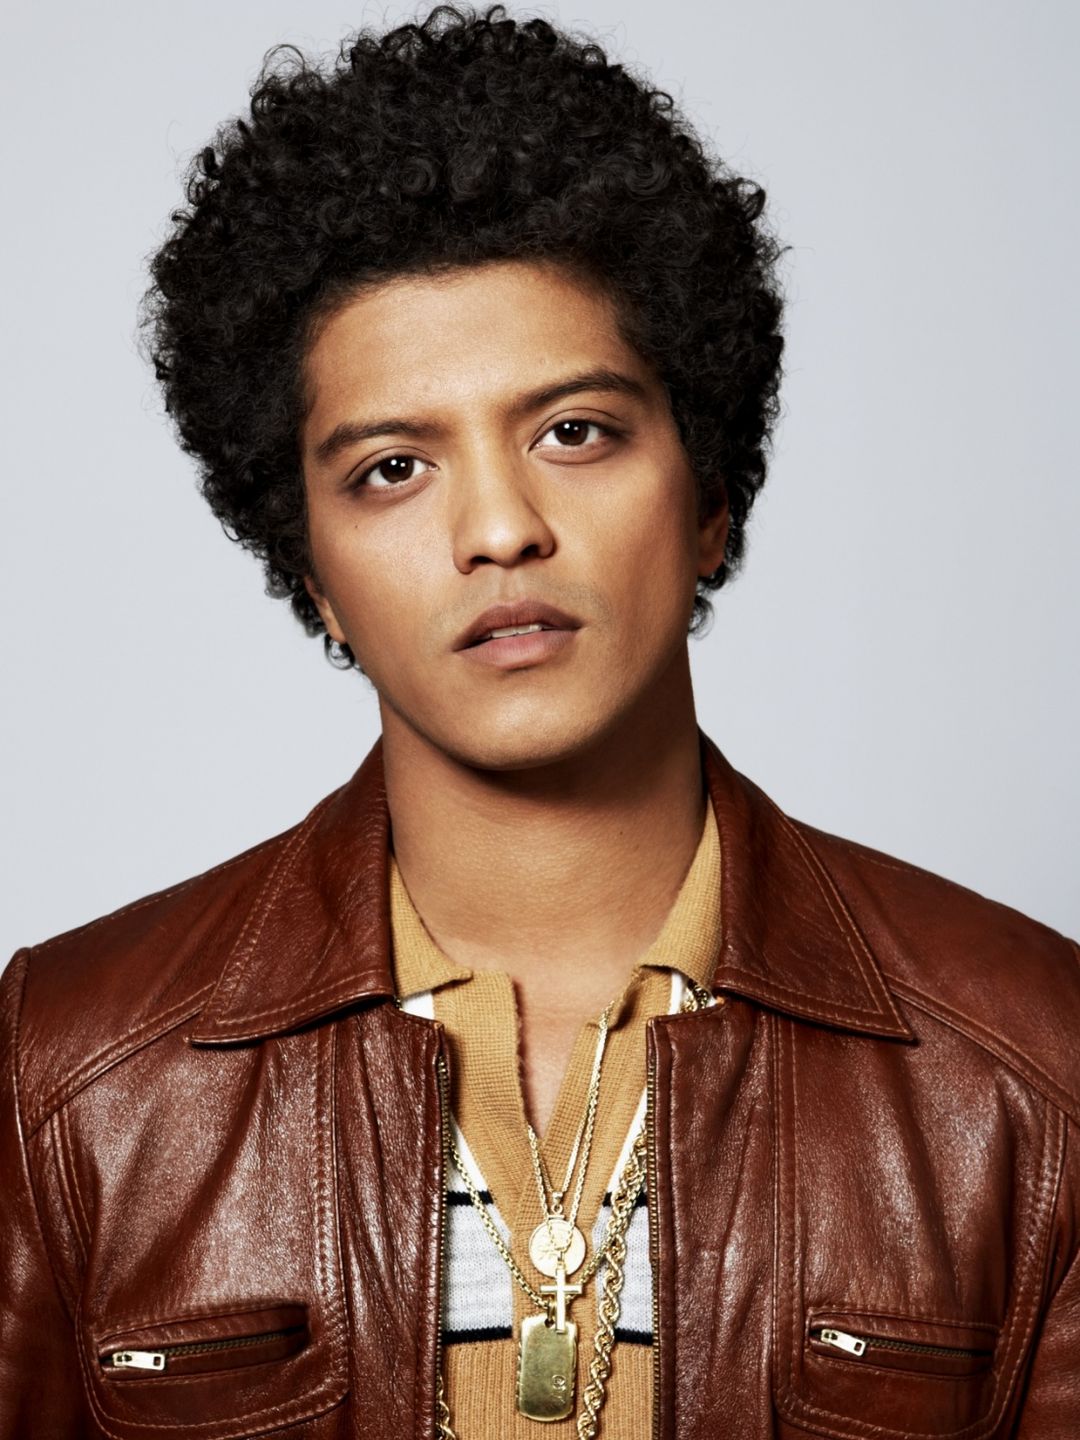 Bruno Mars who are his parents